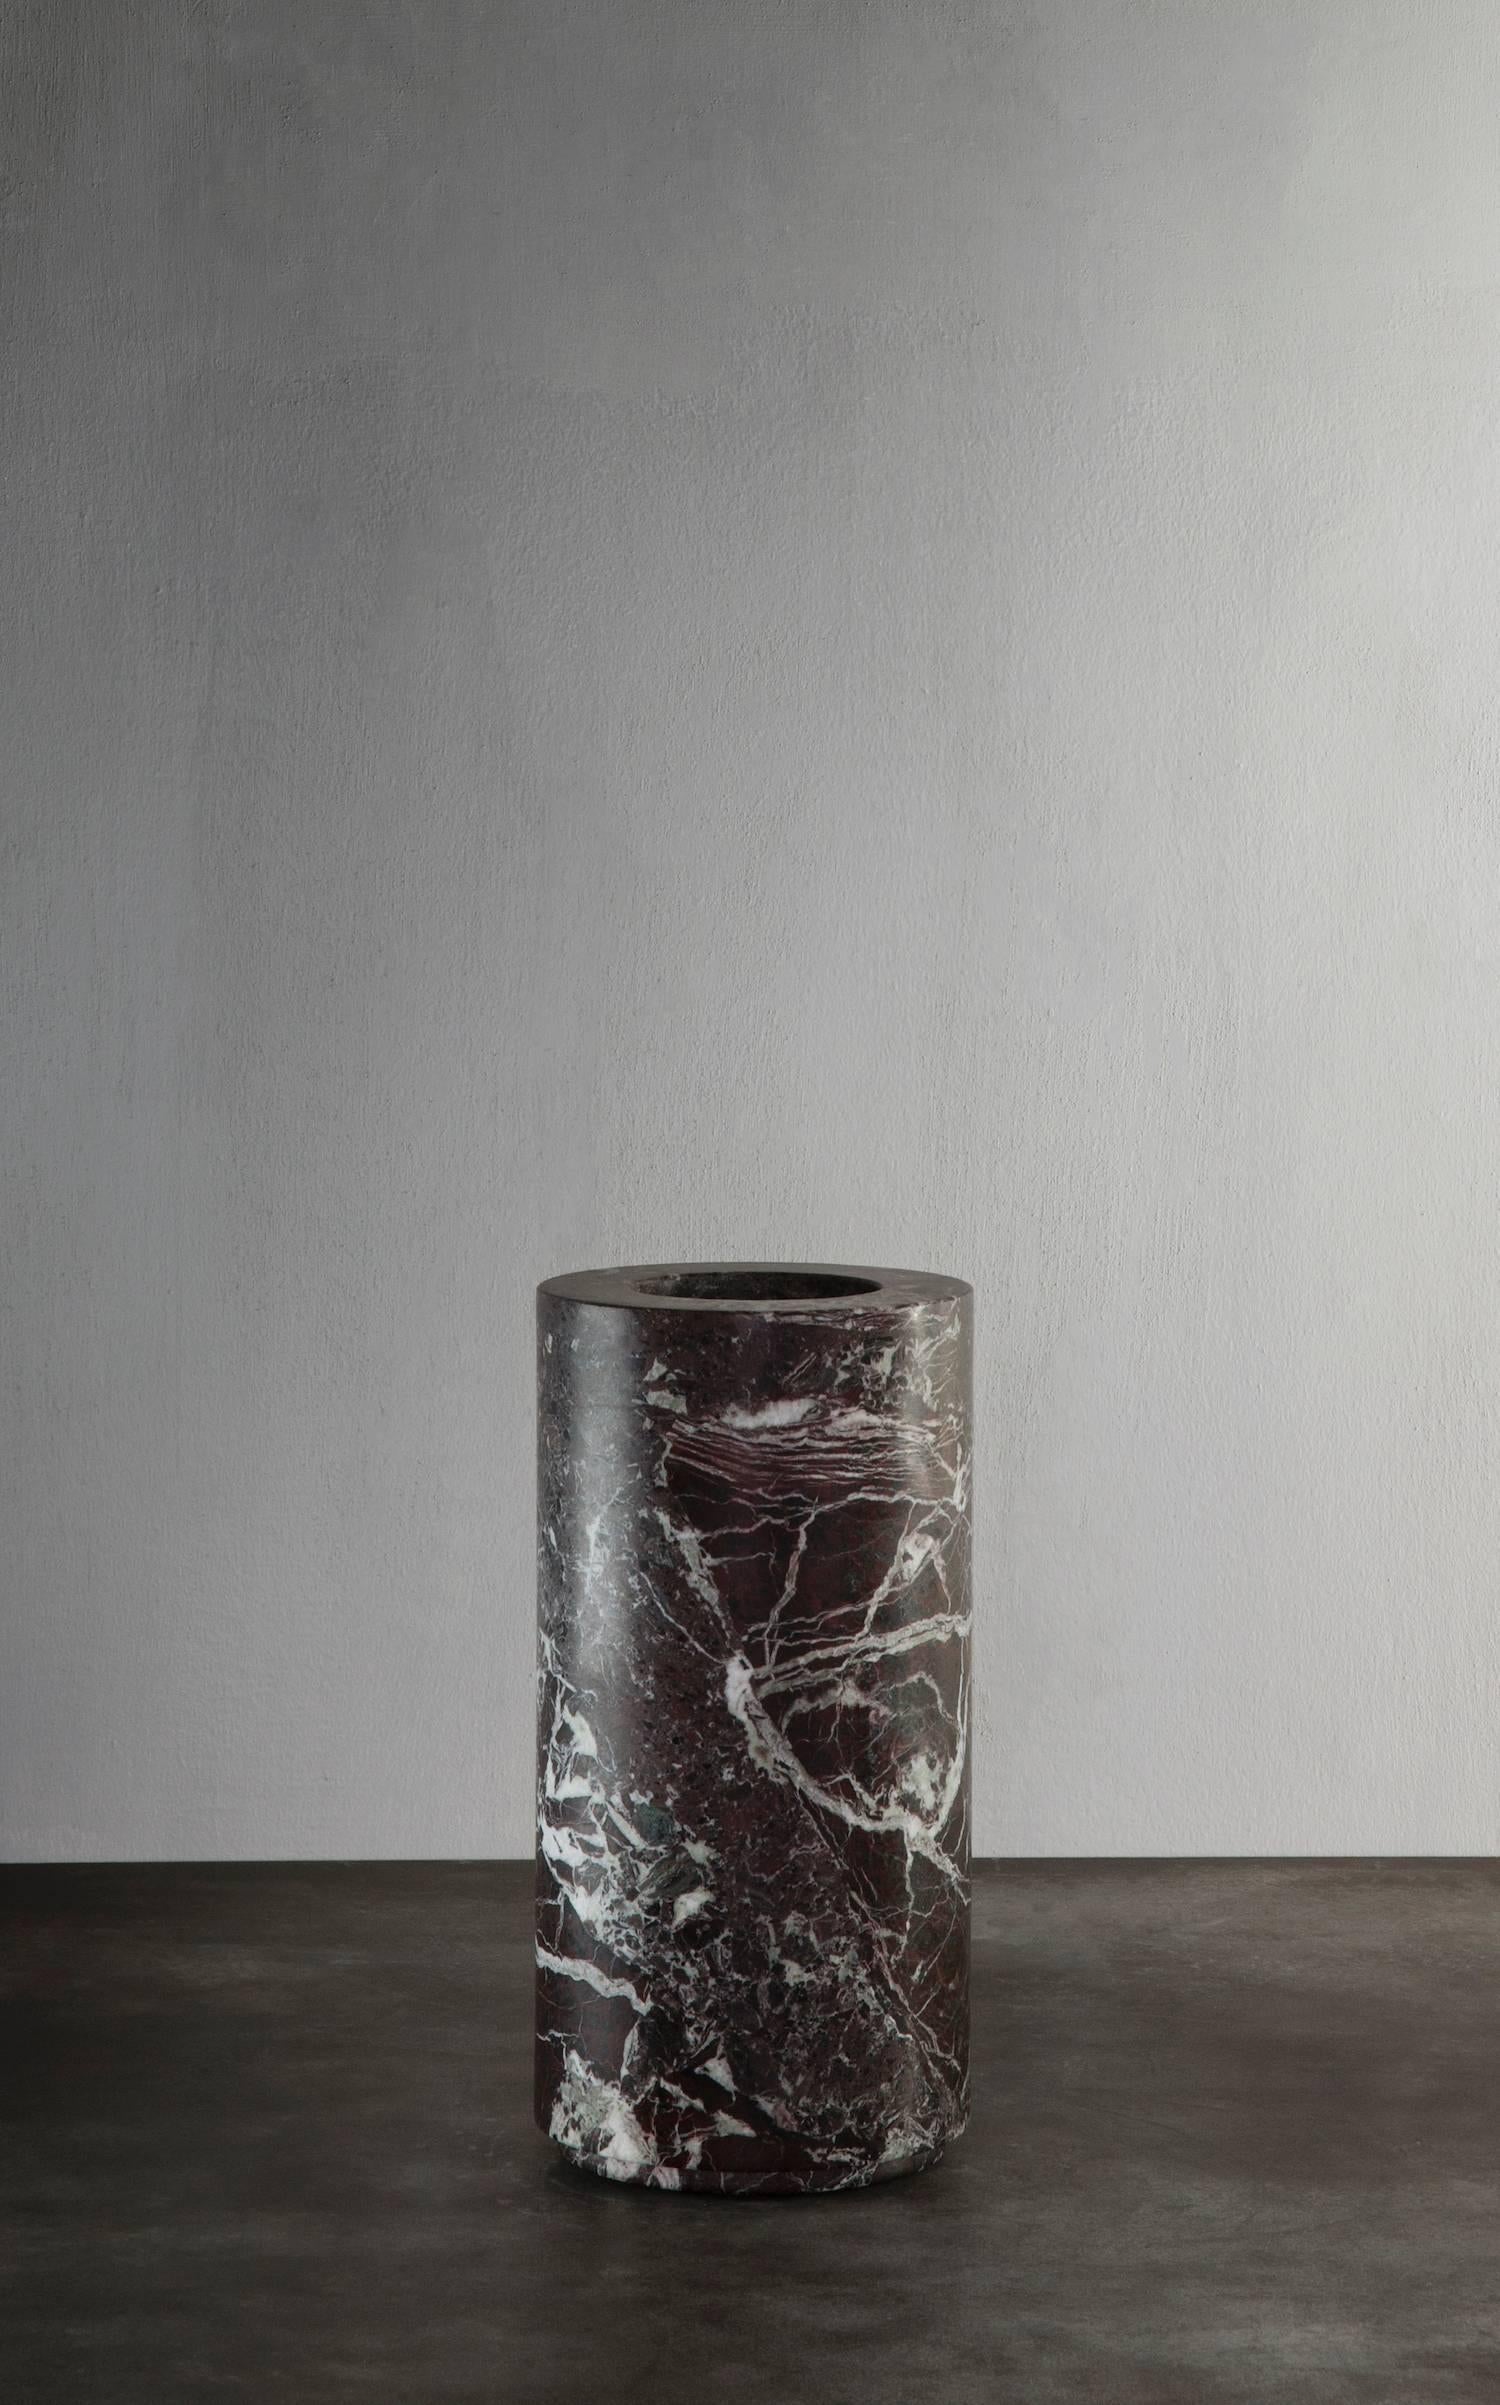 Large cylindrical shaped vase in dark bordeaux marble - 'rosso levanto marble' from Michaël Verheyden.
Please note: This item is located in our New York City Studio and will be shipped from there.